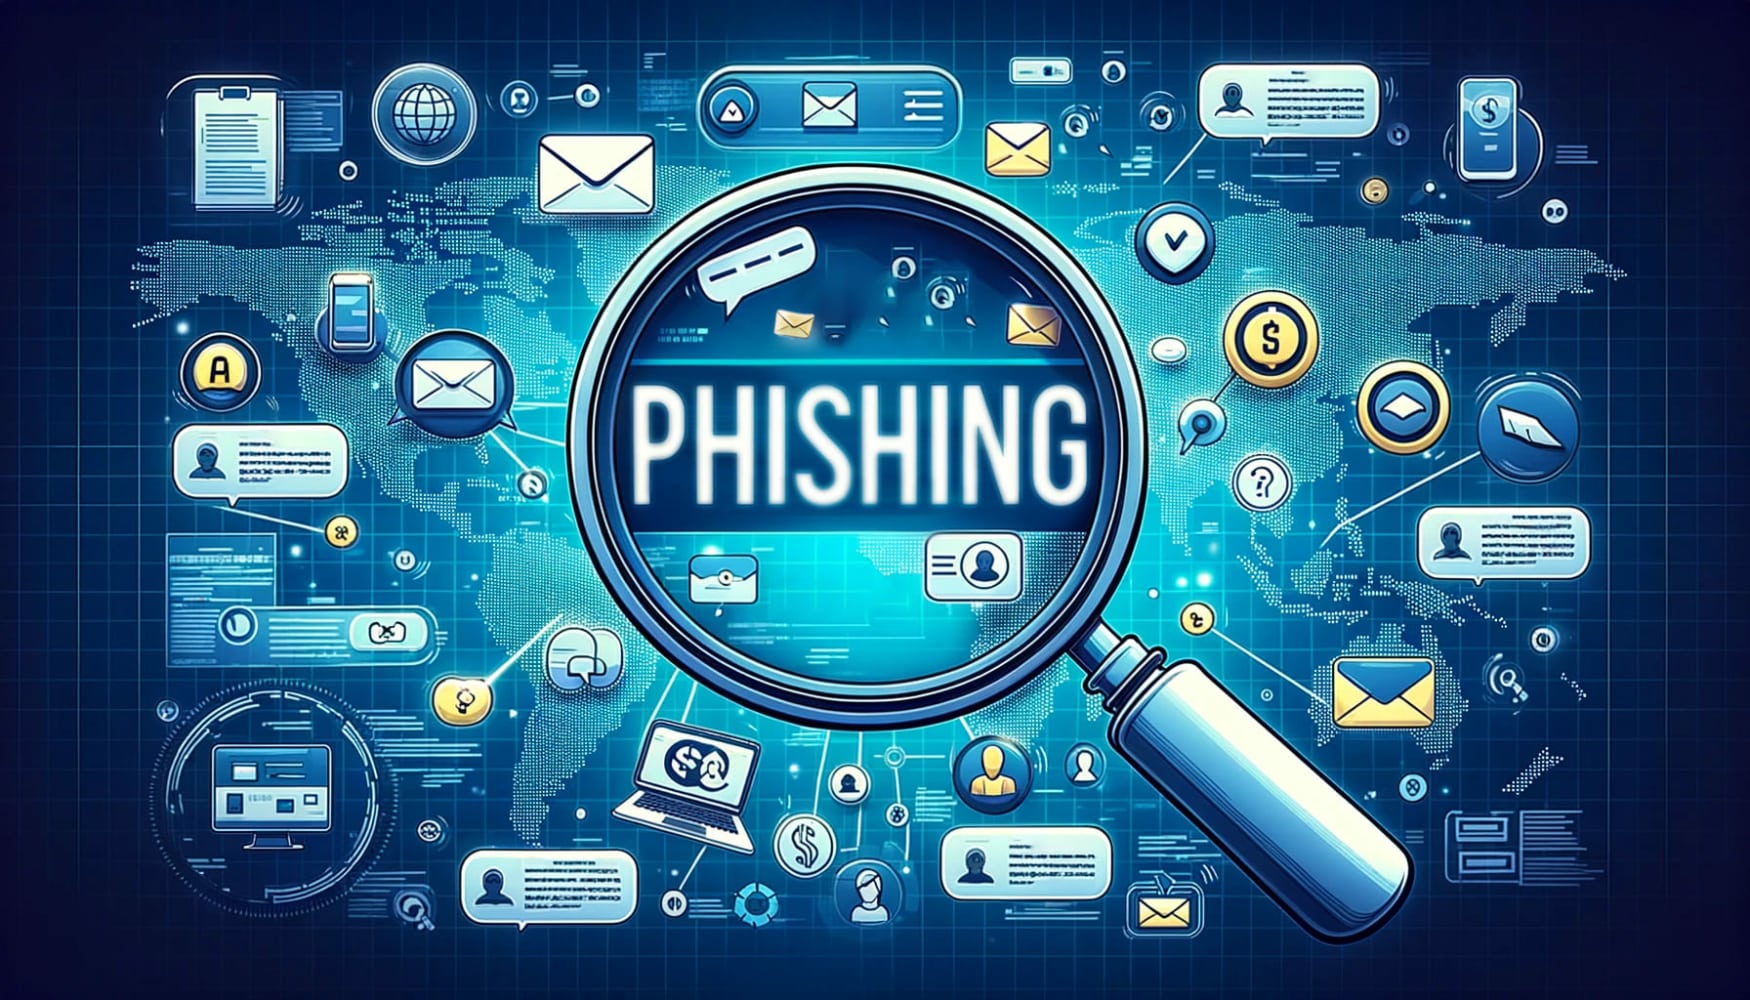 picture phishing with various elements of possible deception